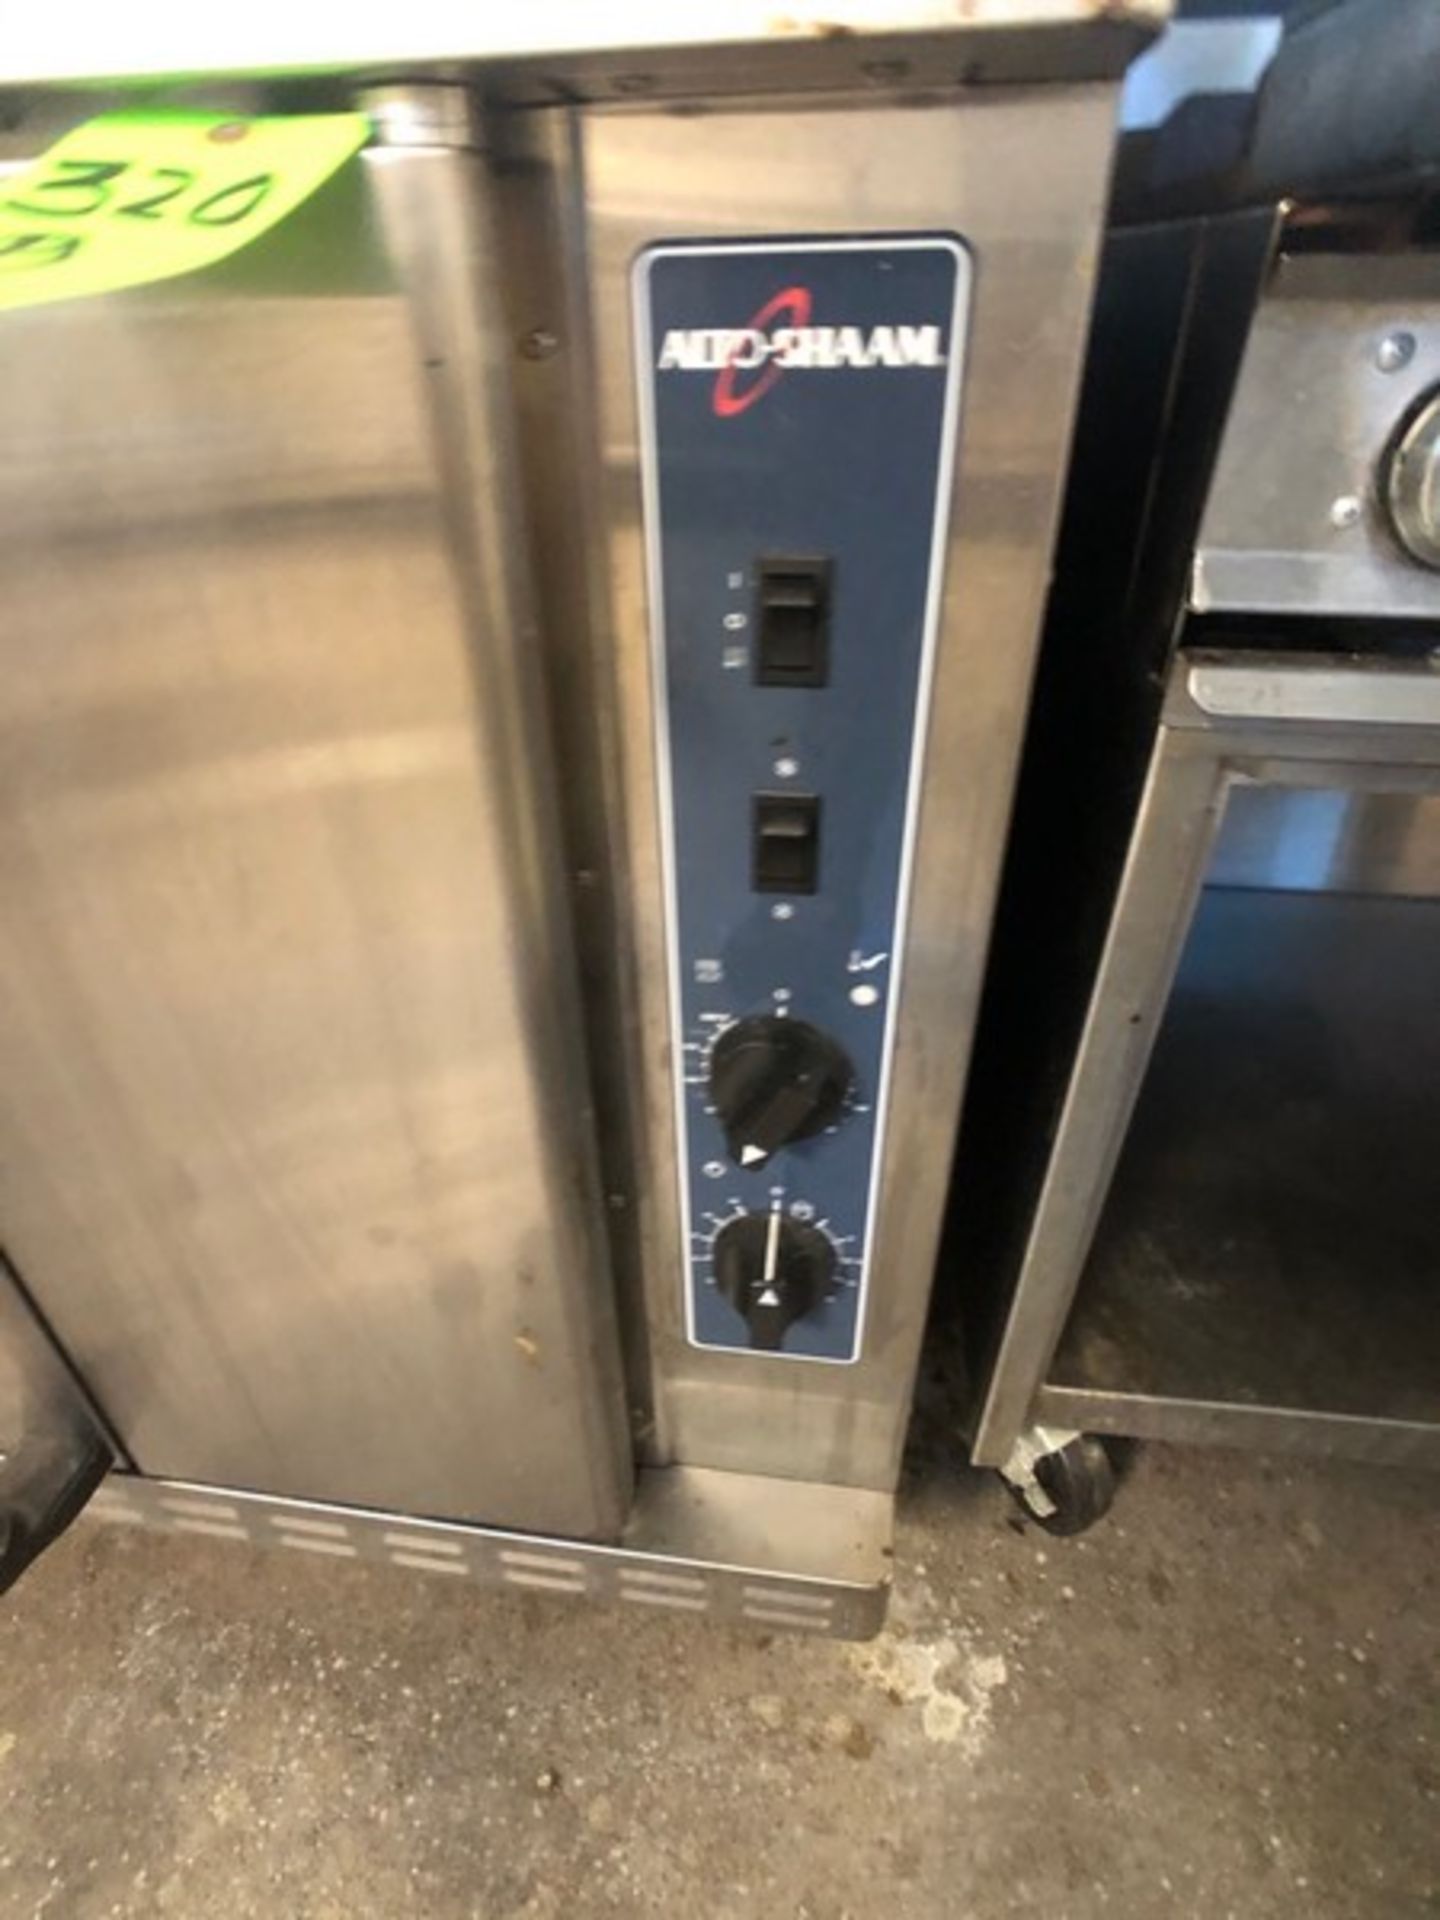 2016 ALTO-SHAM CONVECTION OVEN, MODEL ASC-4G, S/N1745394-000 (INV#74526)(Located @ the MDG Auction - Image 5 of 5